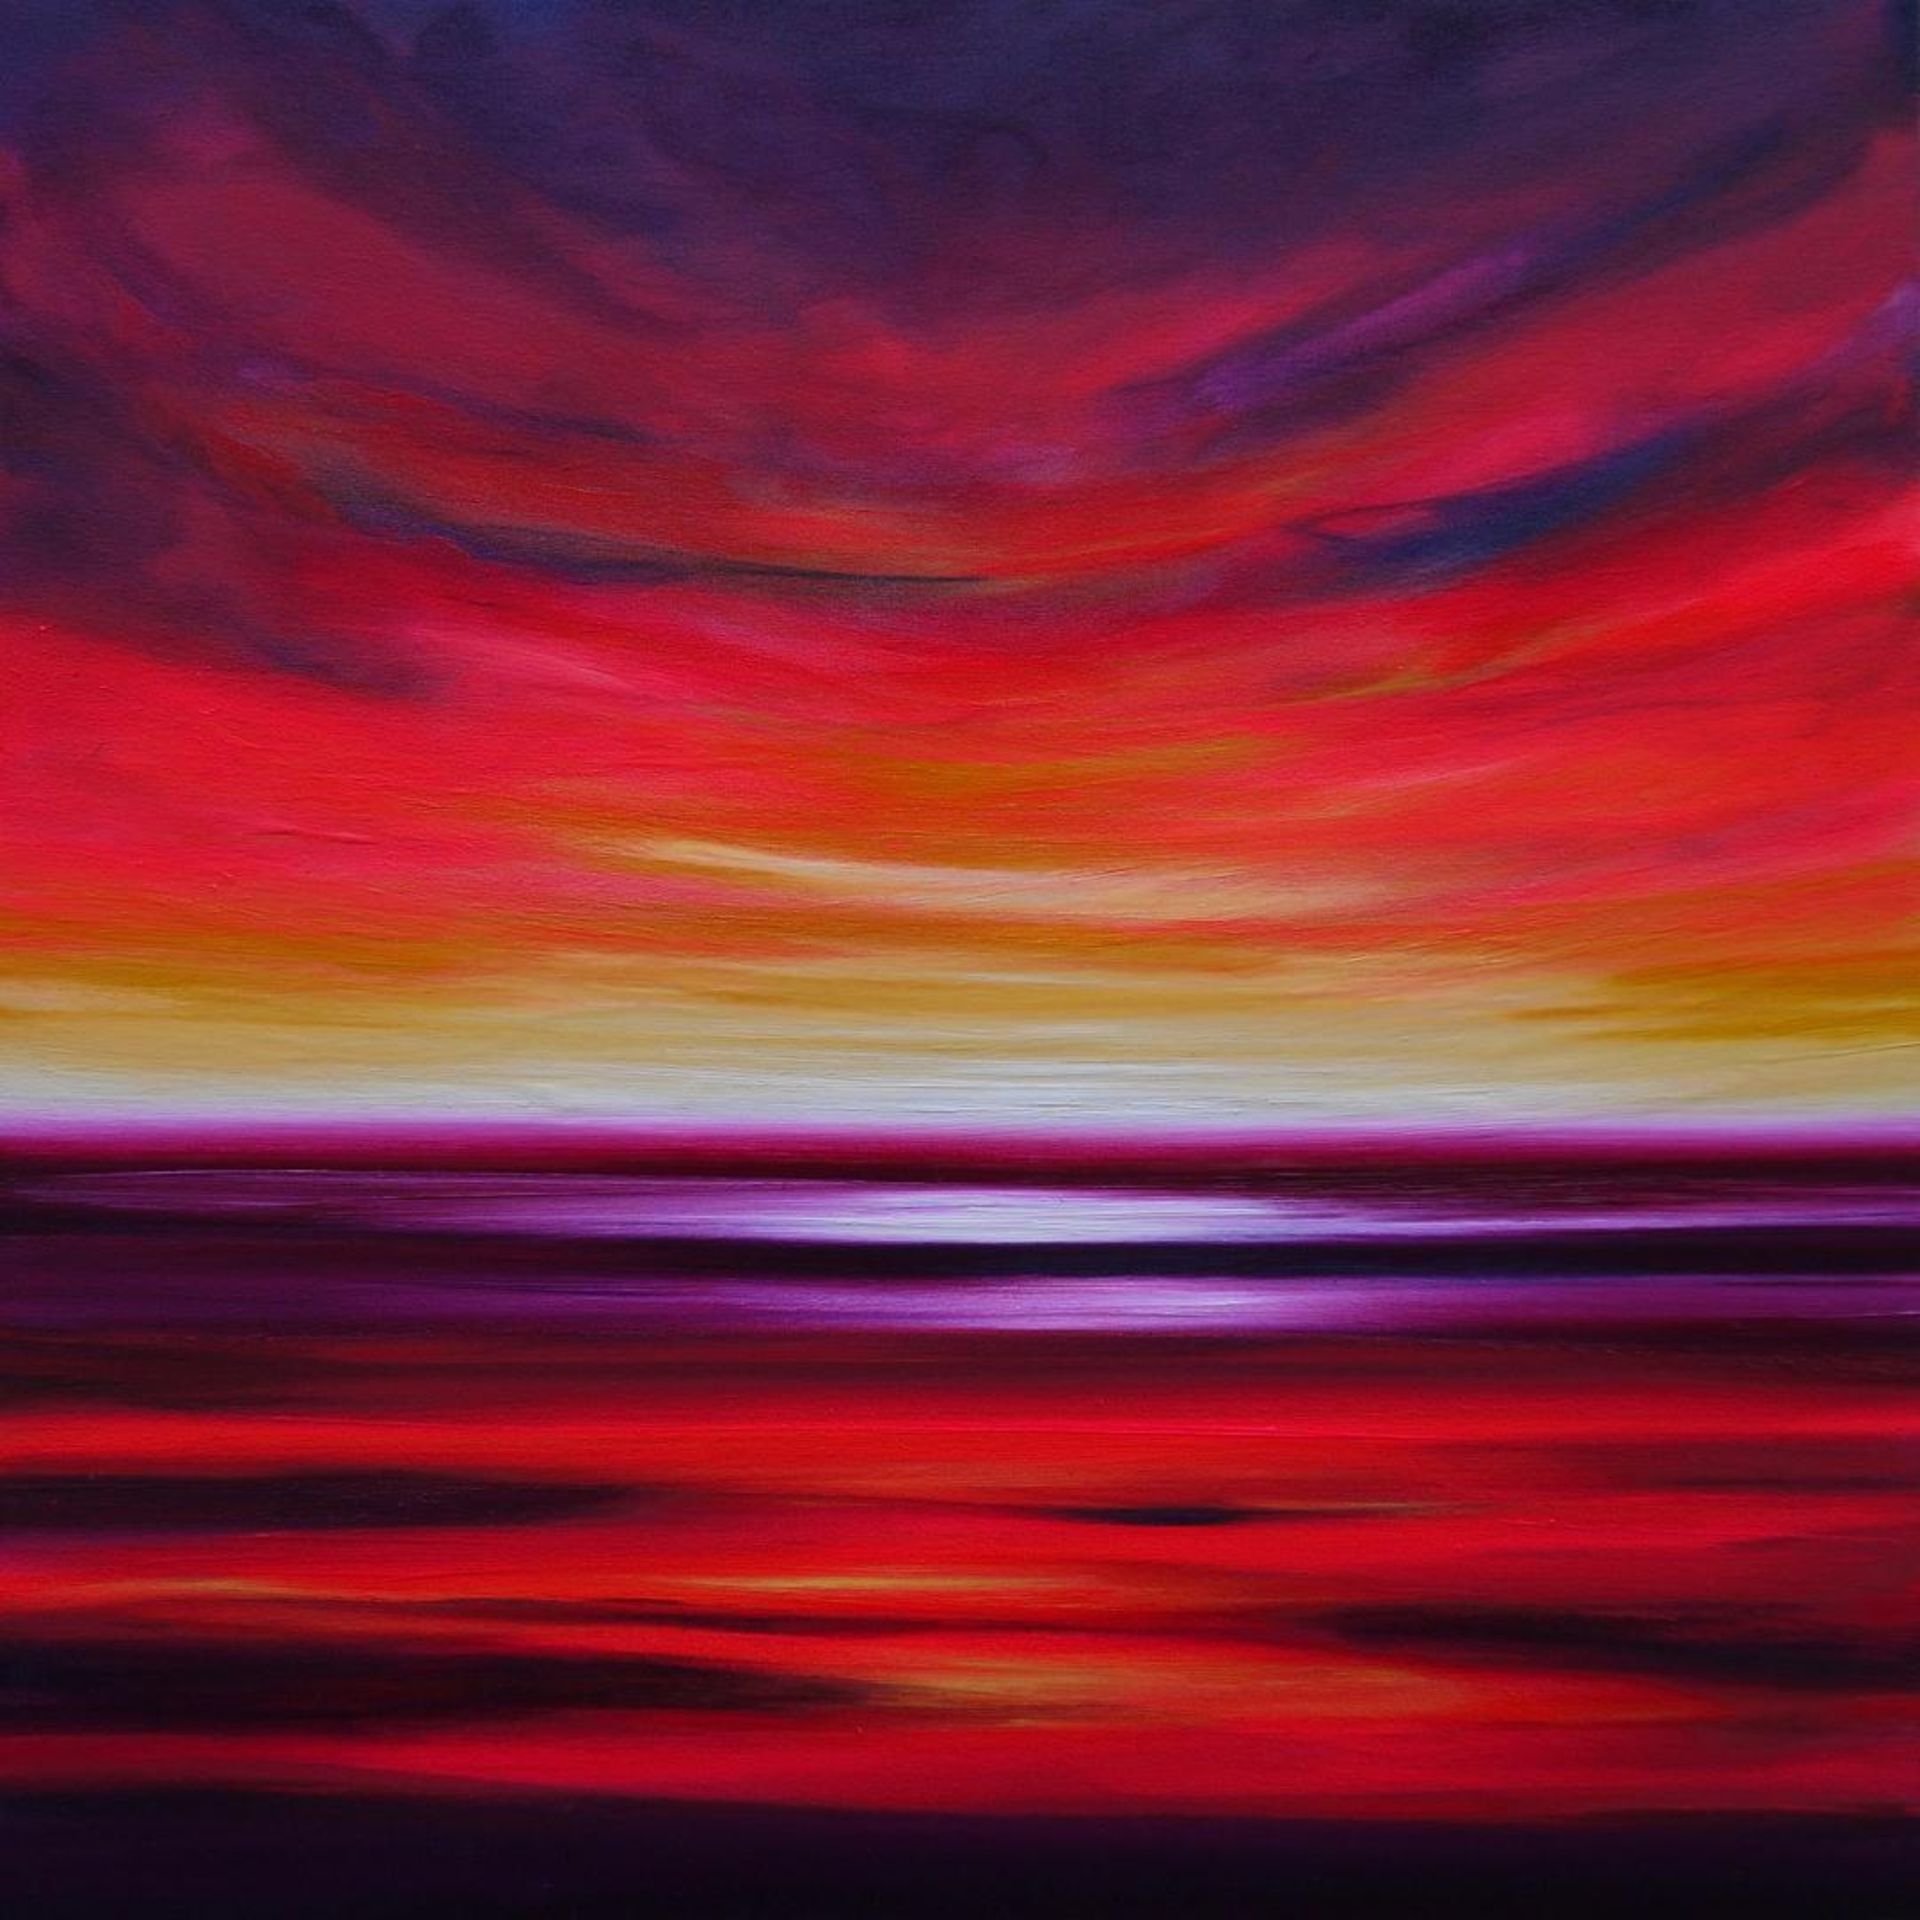 Artist: Julia Everett “Wild is the Wind” is a vibrant abstract sunset and seascape oil painting